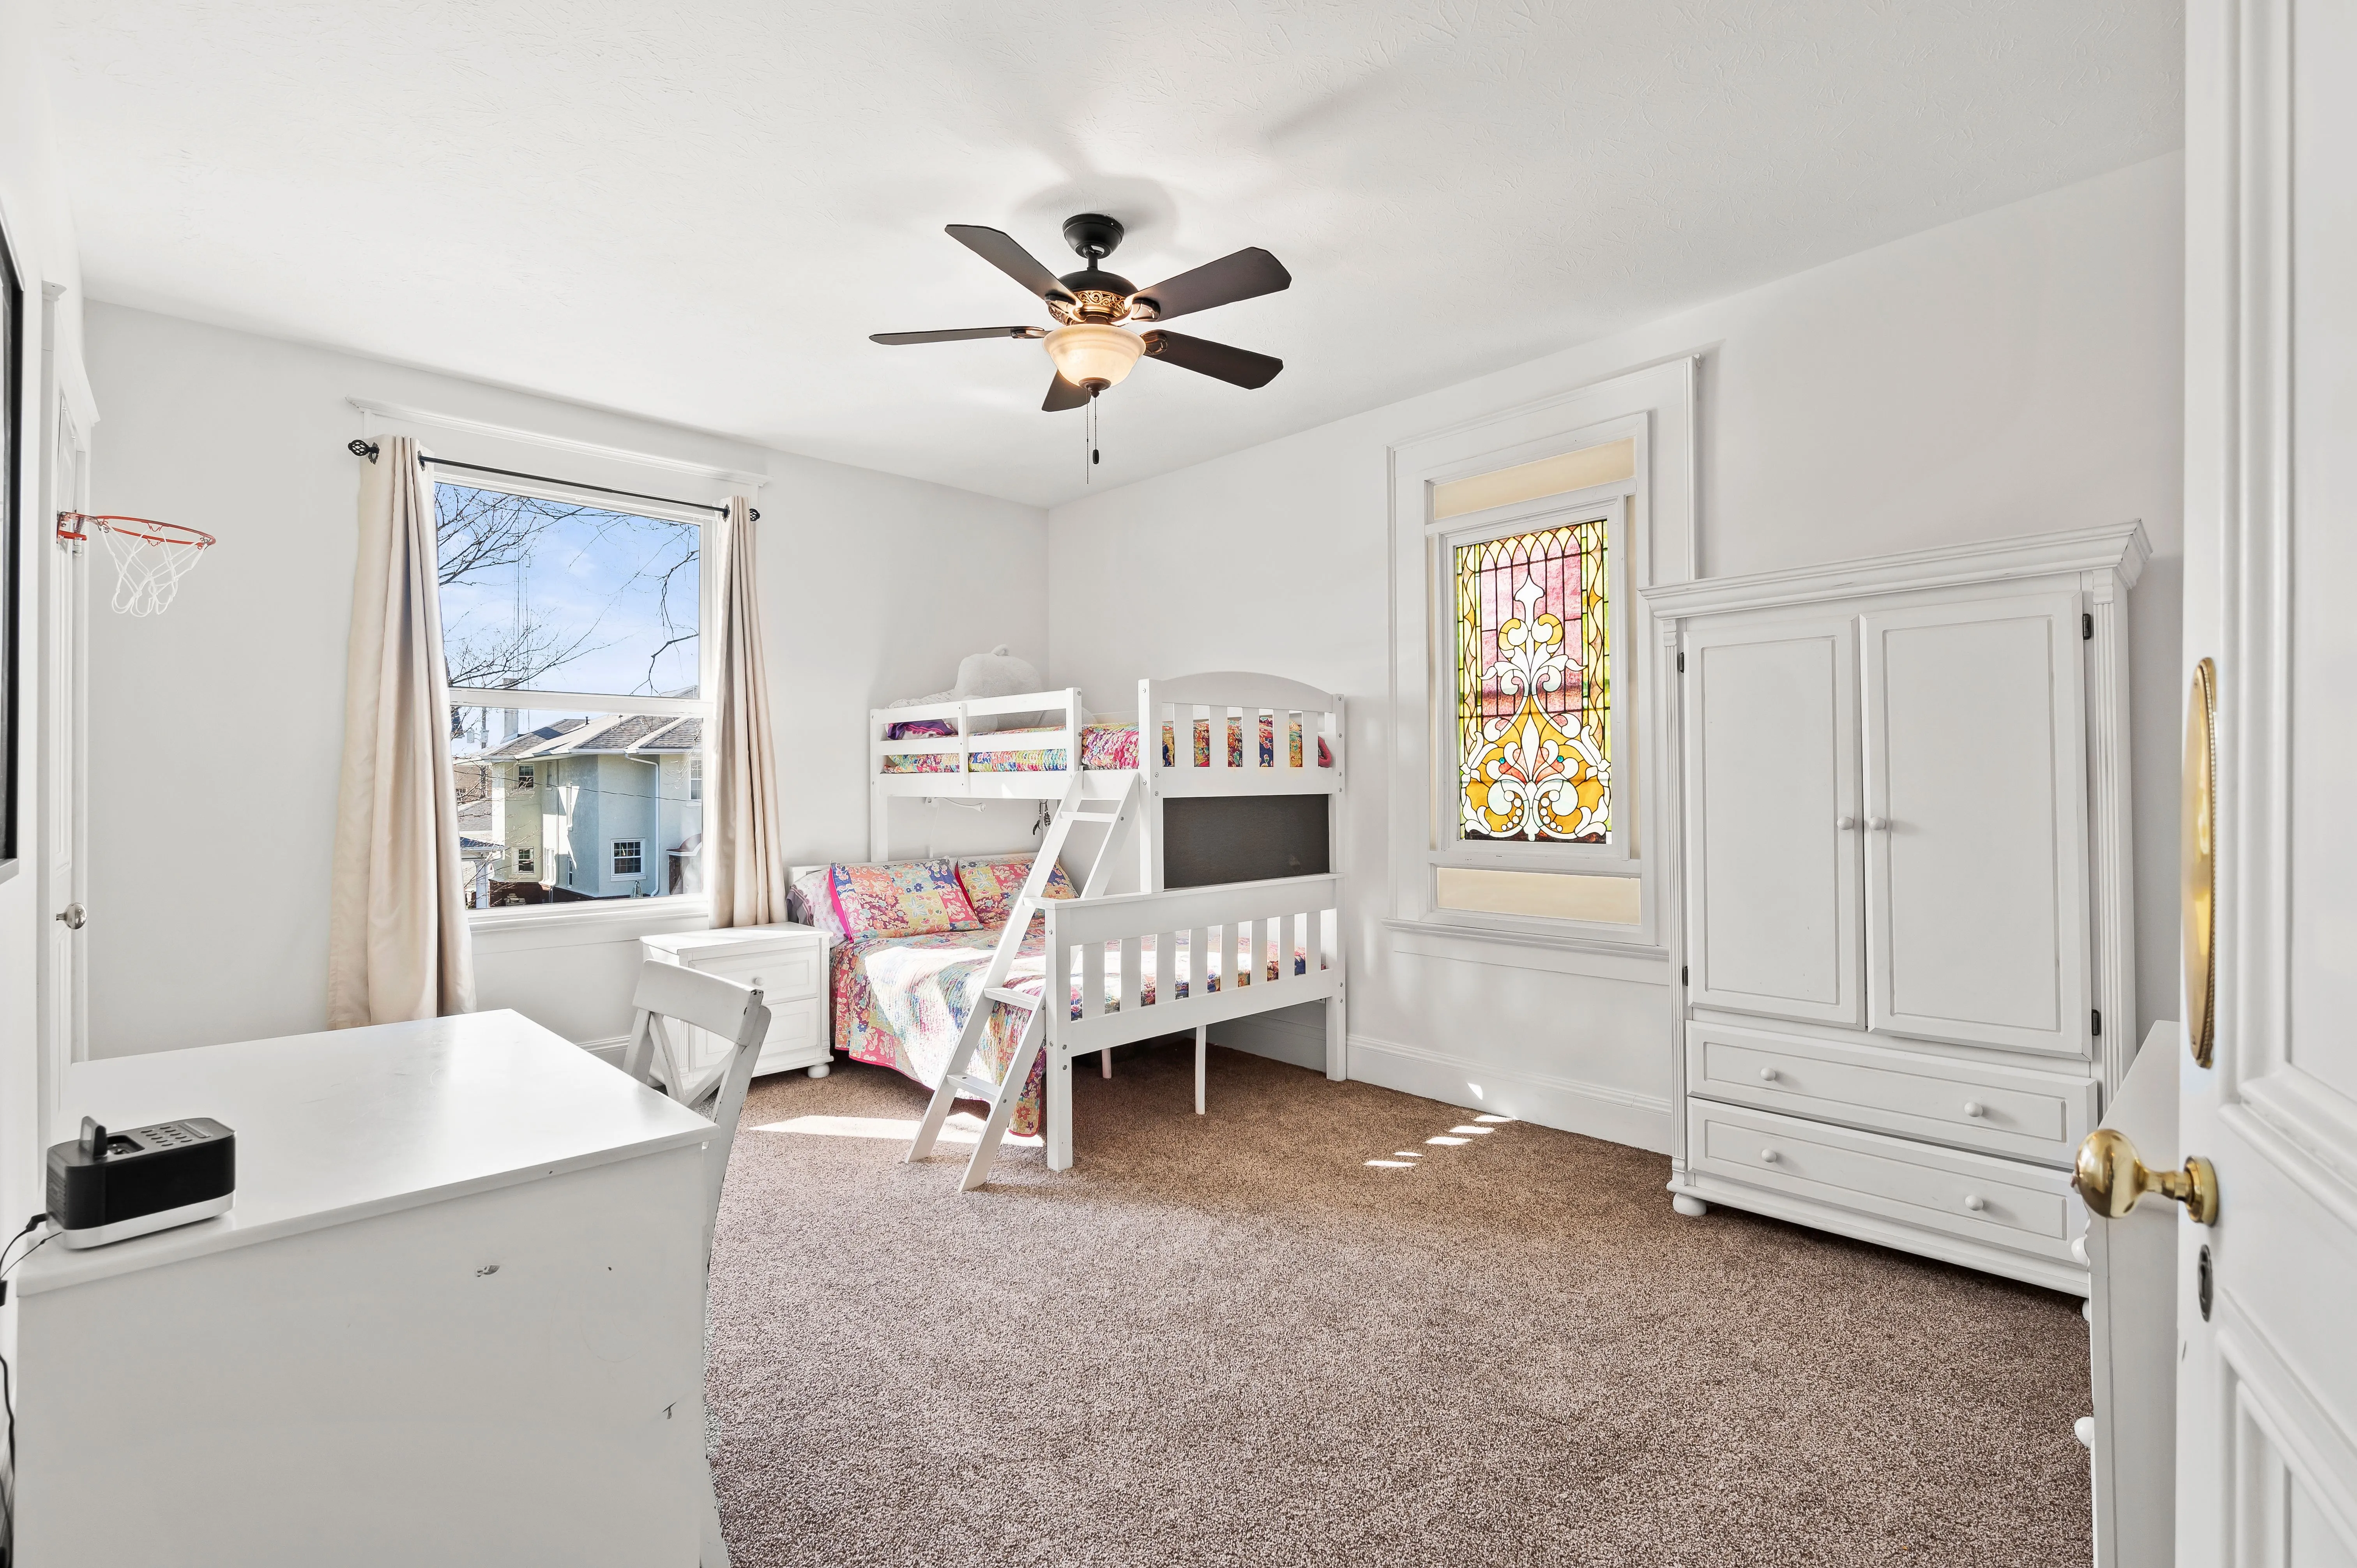 Bright child's bedroom with white bunk beds, a play area, a ceiling fan, and a stained glass window.